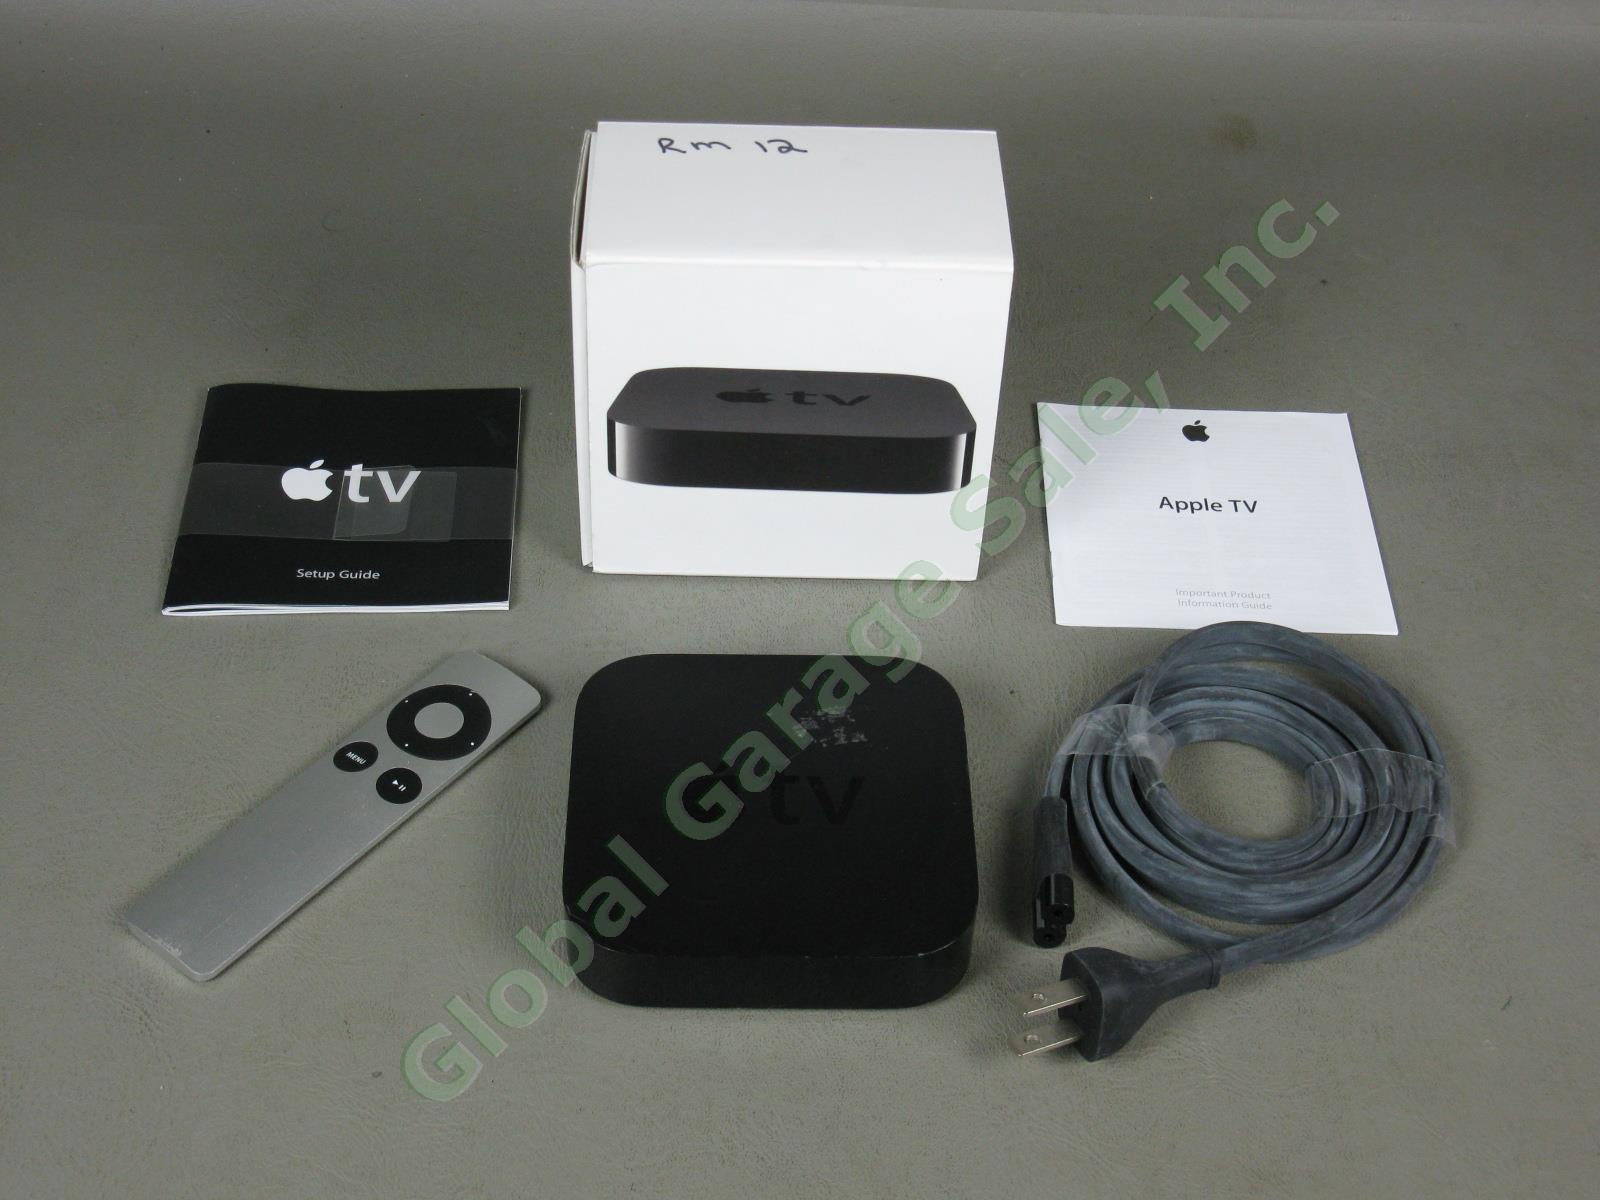 Apple TV 1080p Model A1427 3rd Gen Generation MD199LL/A One Owner Box Remote NR!